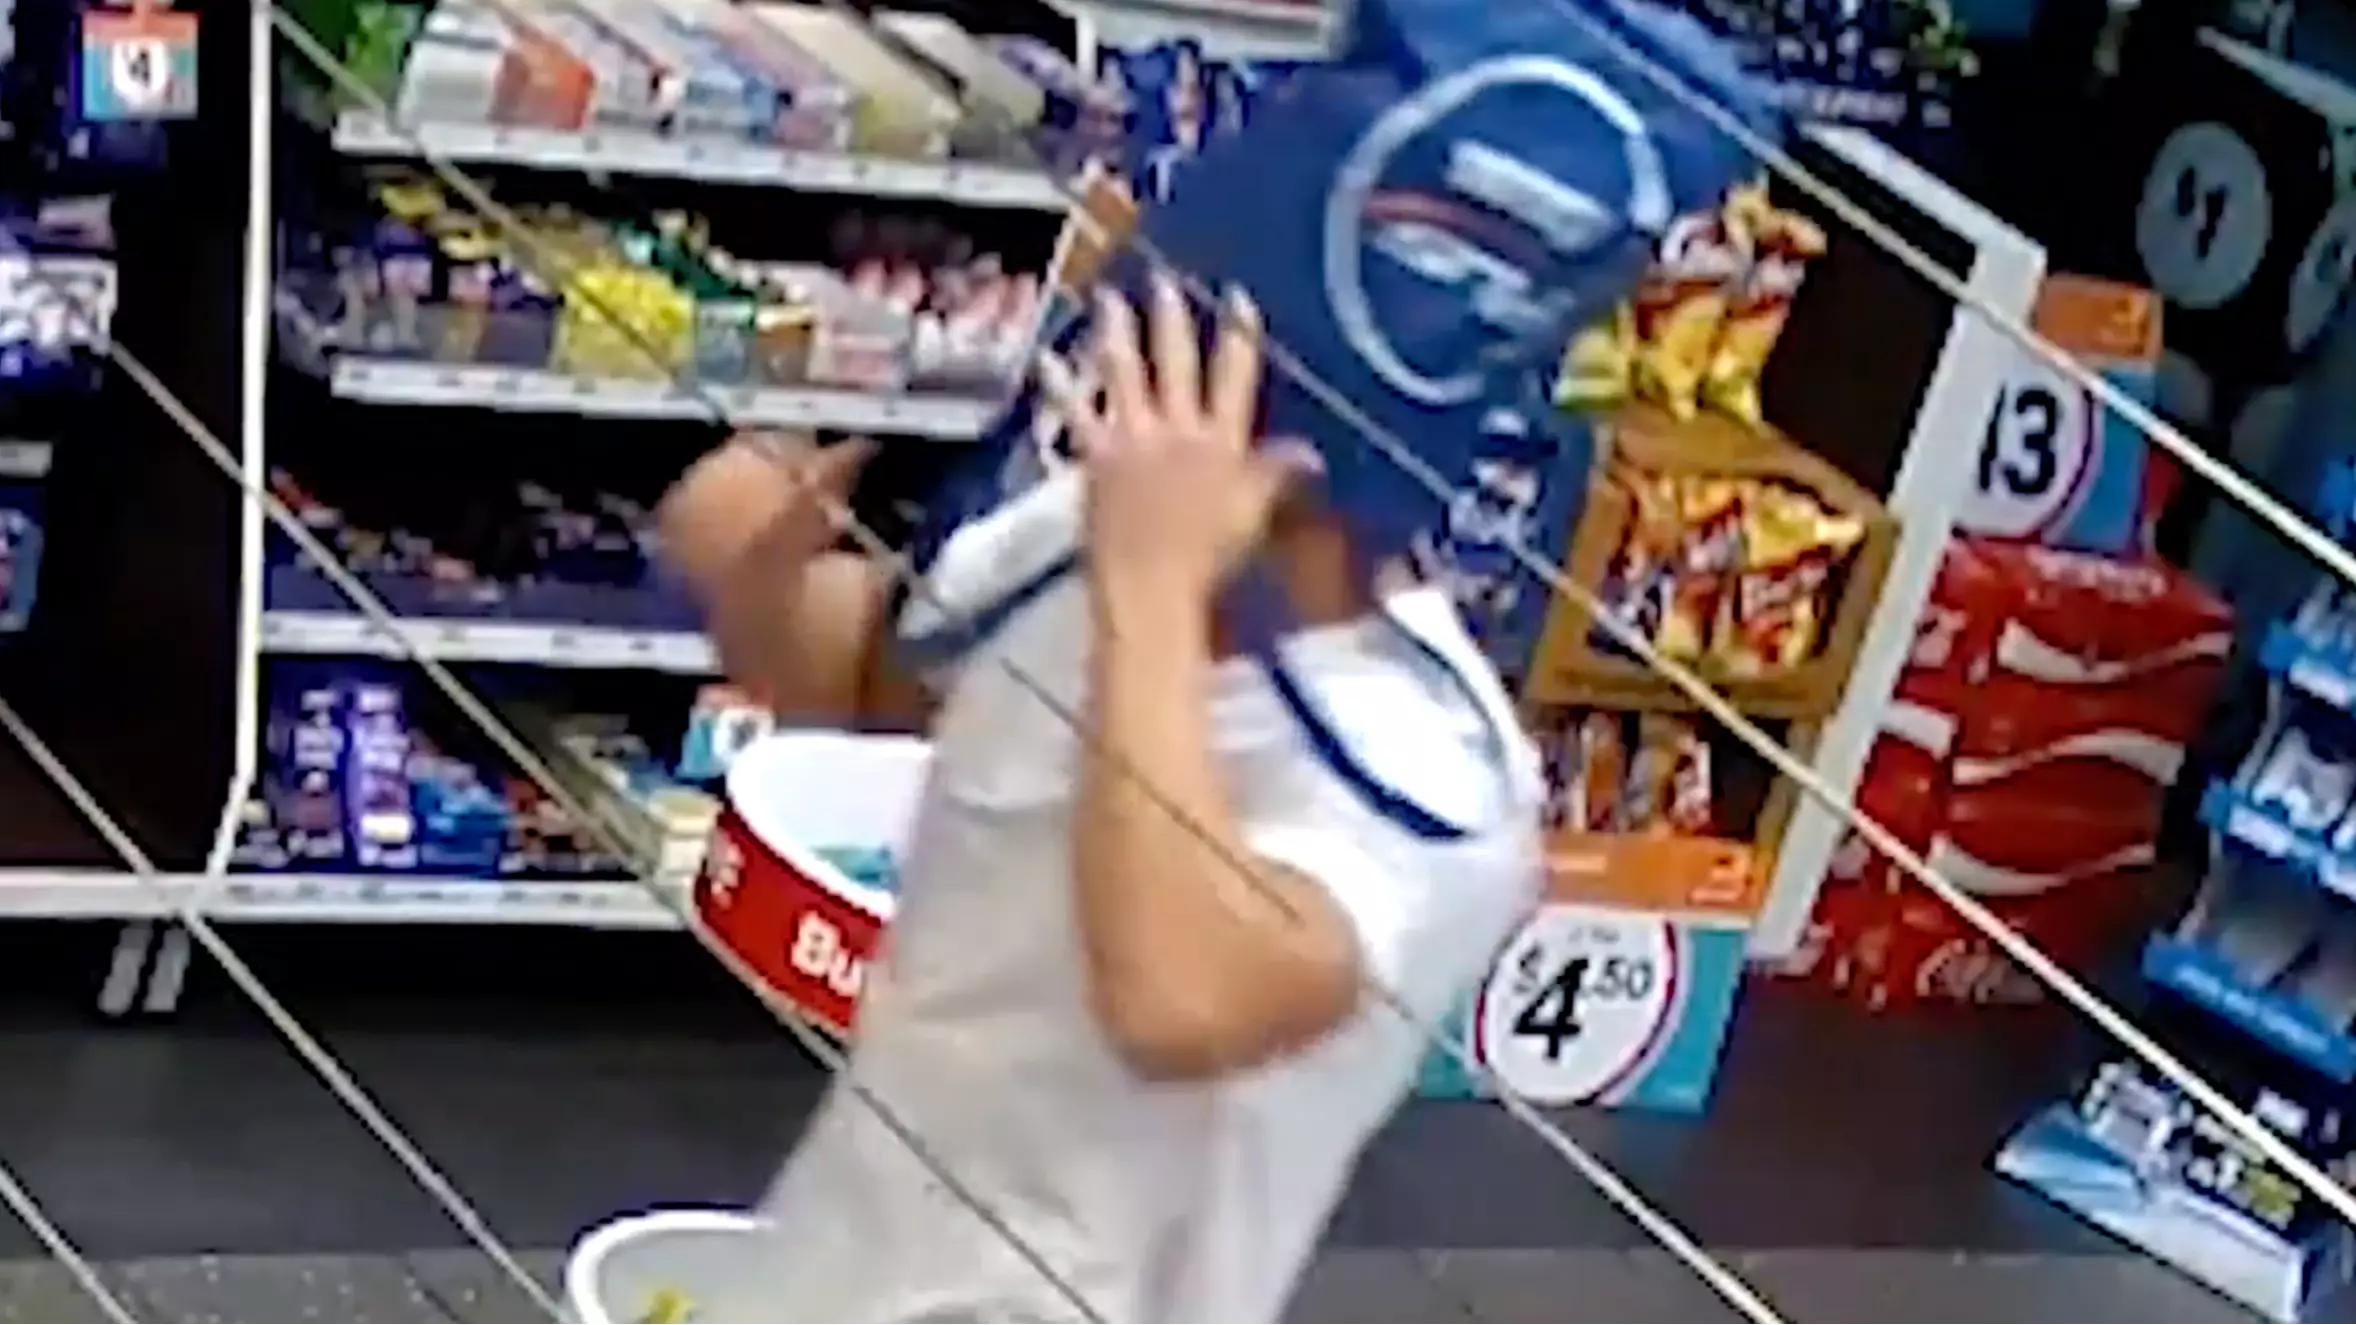 Police Looking For Bloke Who Robbed Queensland Servo With A Shopping Bag On His Head